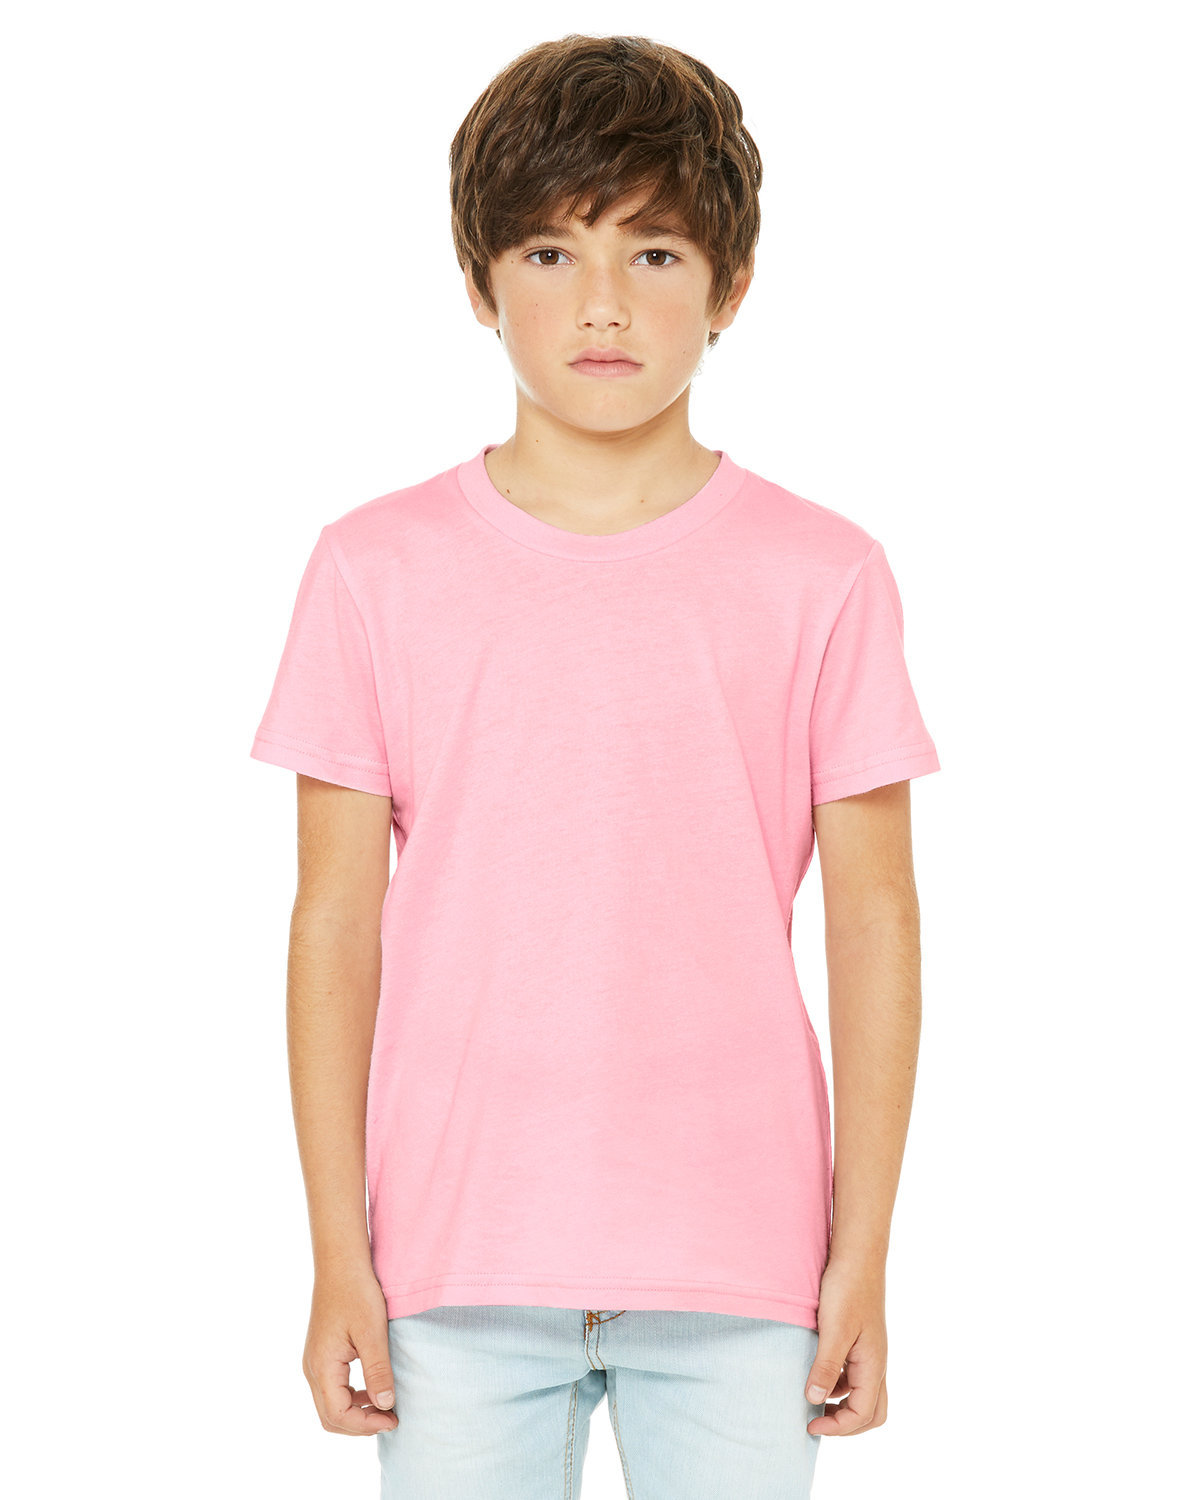 Bella + Canvas Youth Jersey T-Shirt PINK 